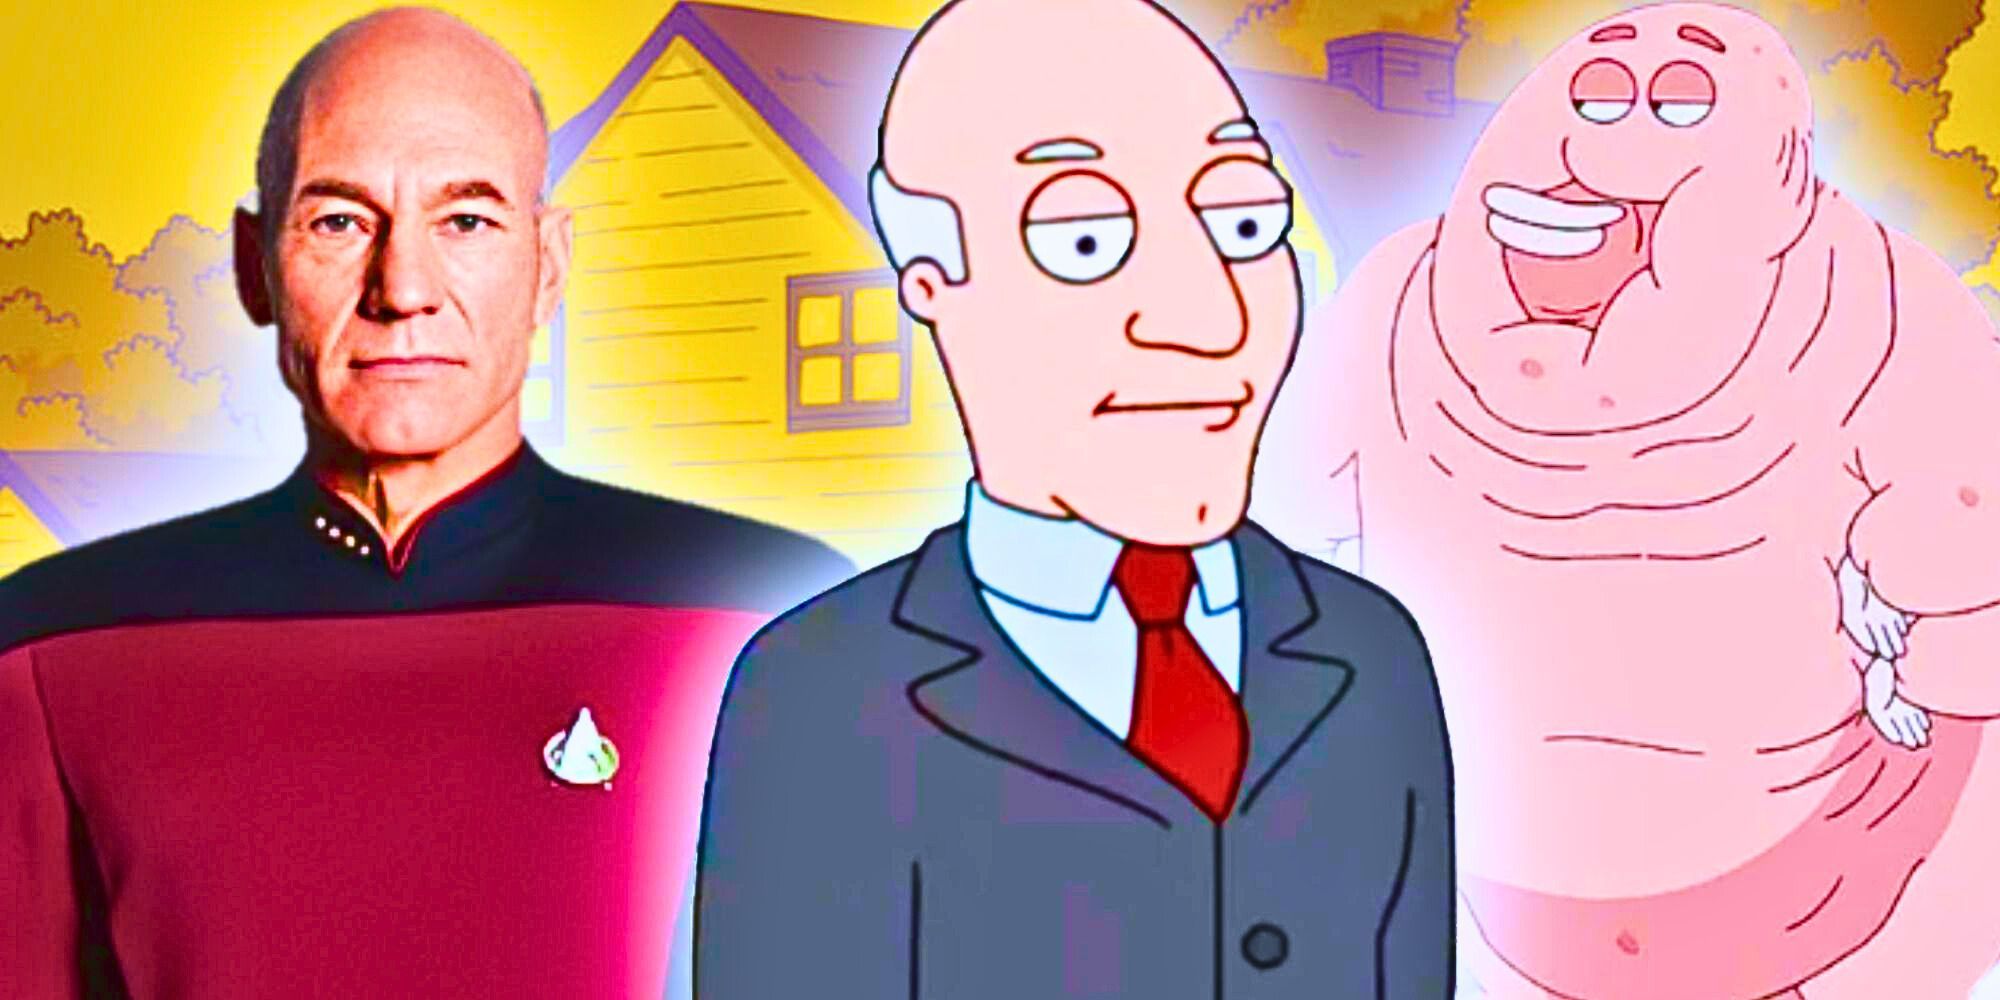 A composite image of various Patrick Stewart characters from Star Trek: The Next Generation and Family Guy